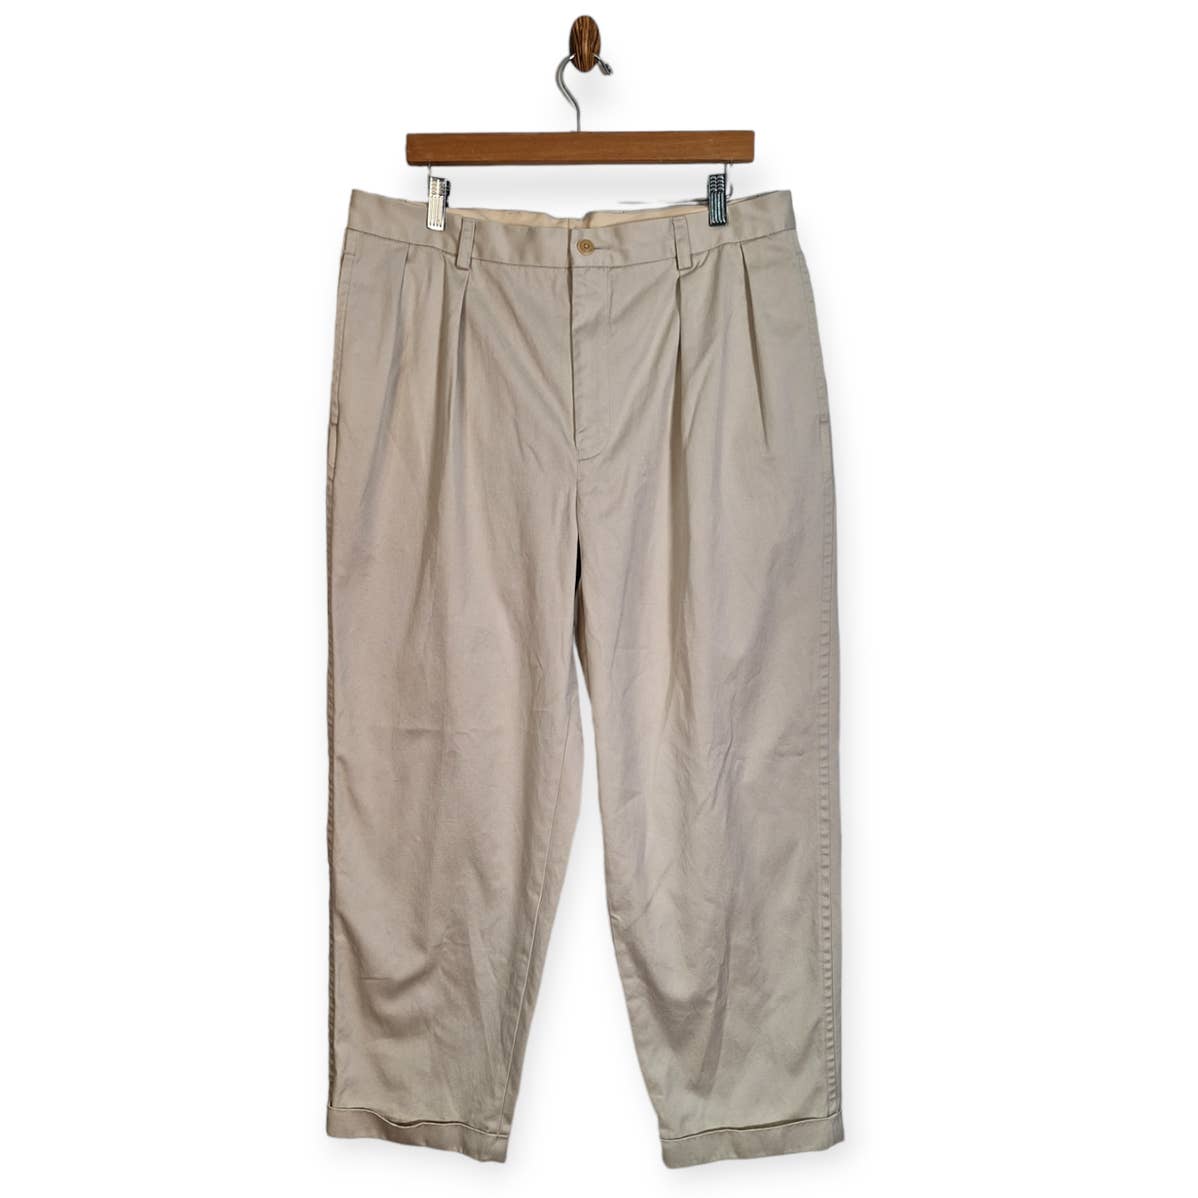 Vintage 90s Baggy Cuffed & Pleated Chino Kahaki Pants, Size 38x30, All Cotton - themallvintage The Mall Vintage